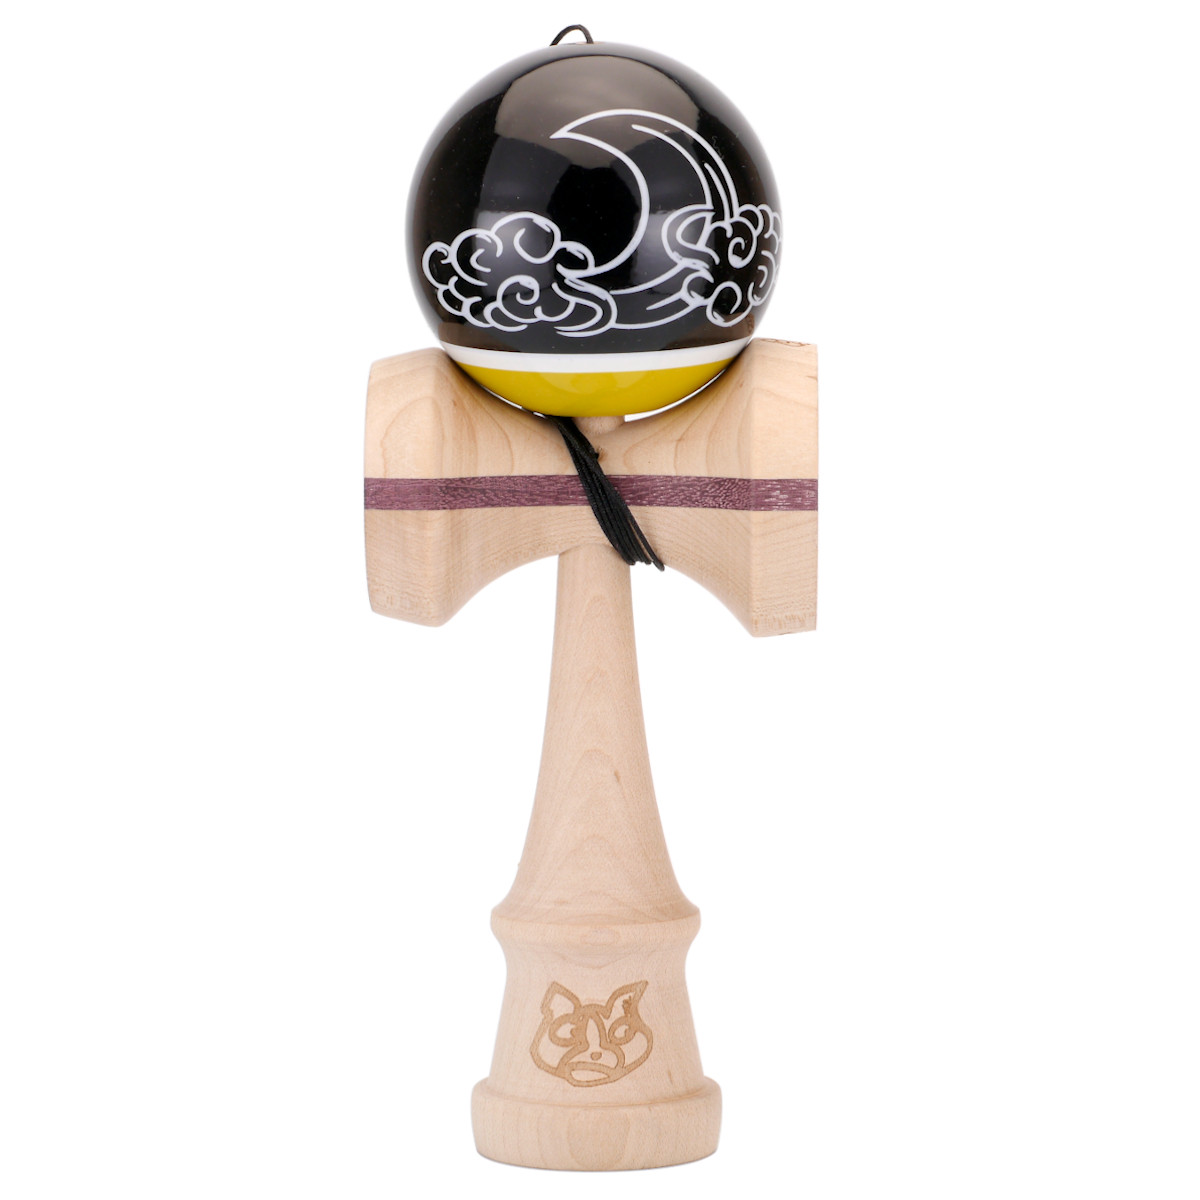 SPINGEAR - Deal With It Wai Chai Pro Mod Kendama